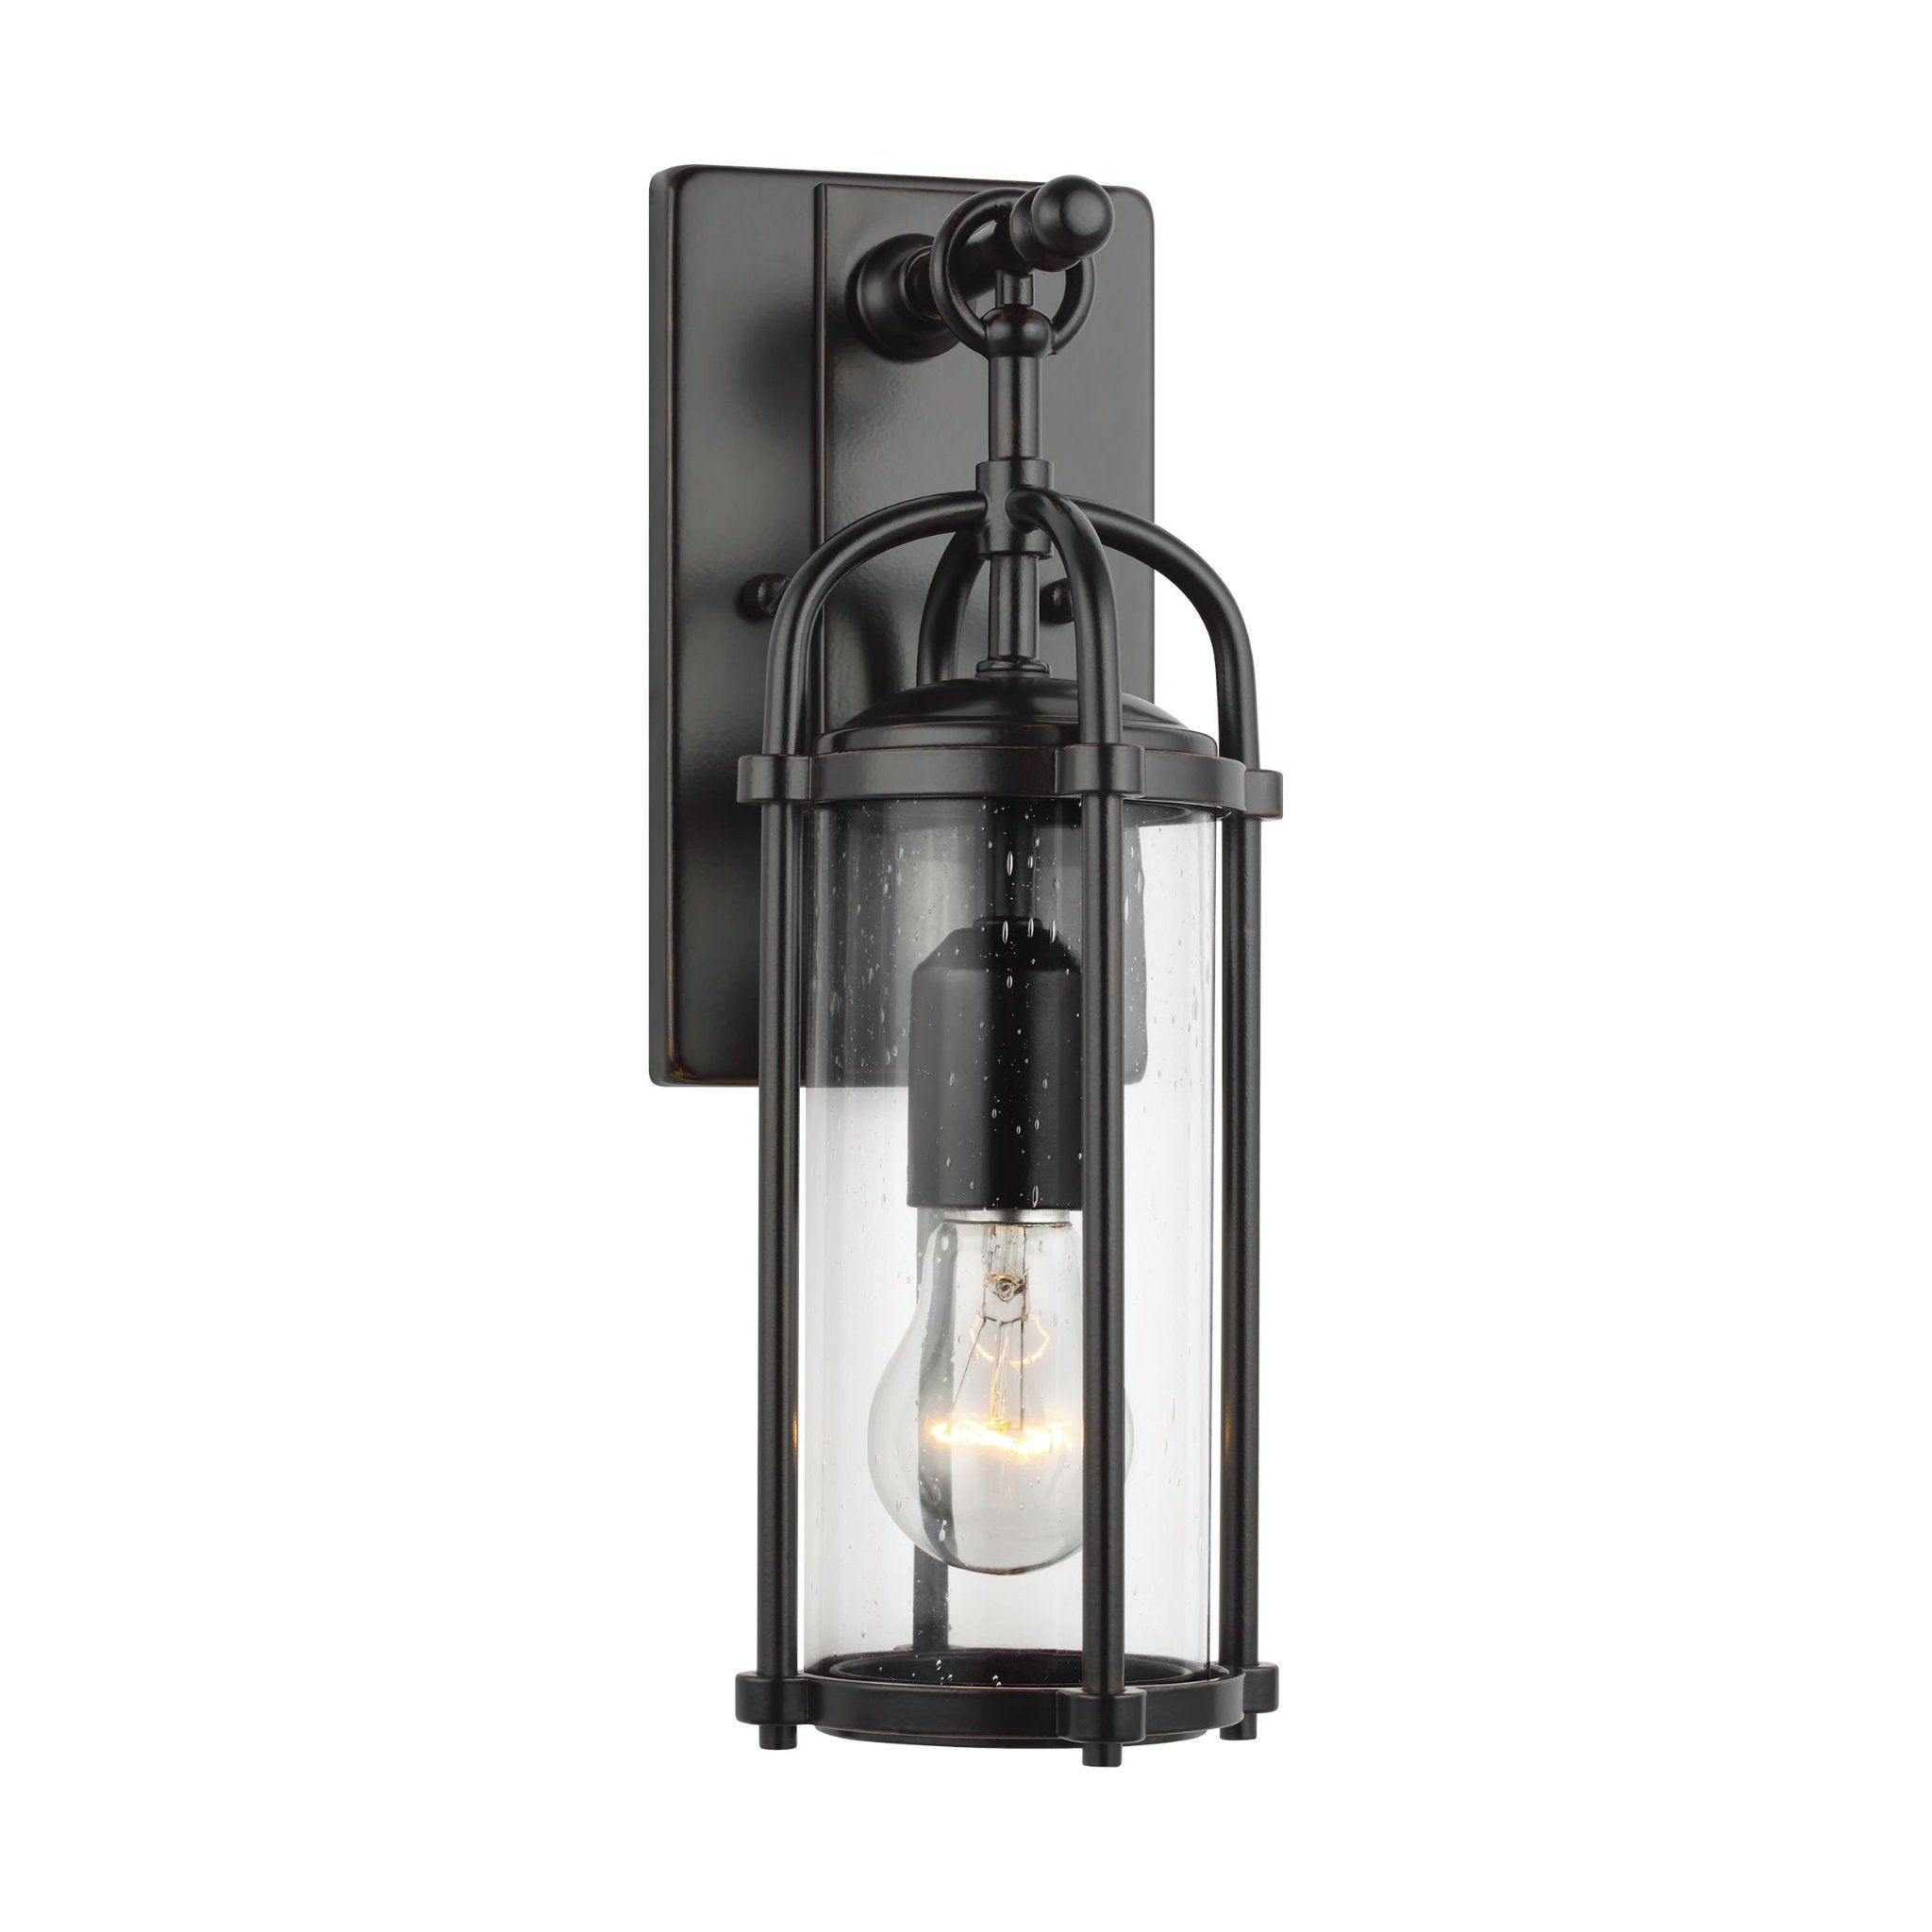 Dakota Small Lantern Transitional Outdoor Fixture 6.125" Width 16.875" Height Aluminum Round Clear Seeded Shade in Espresso